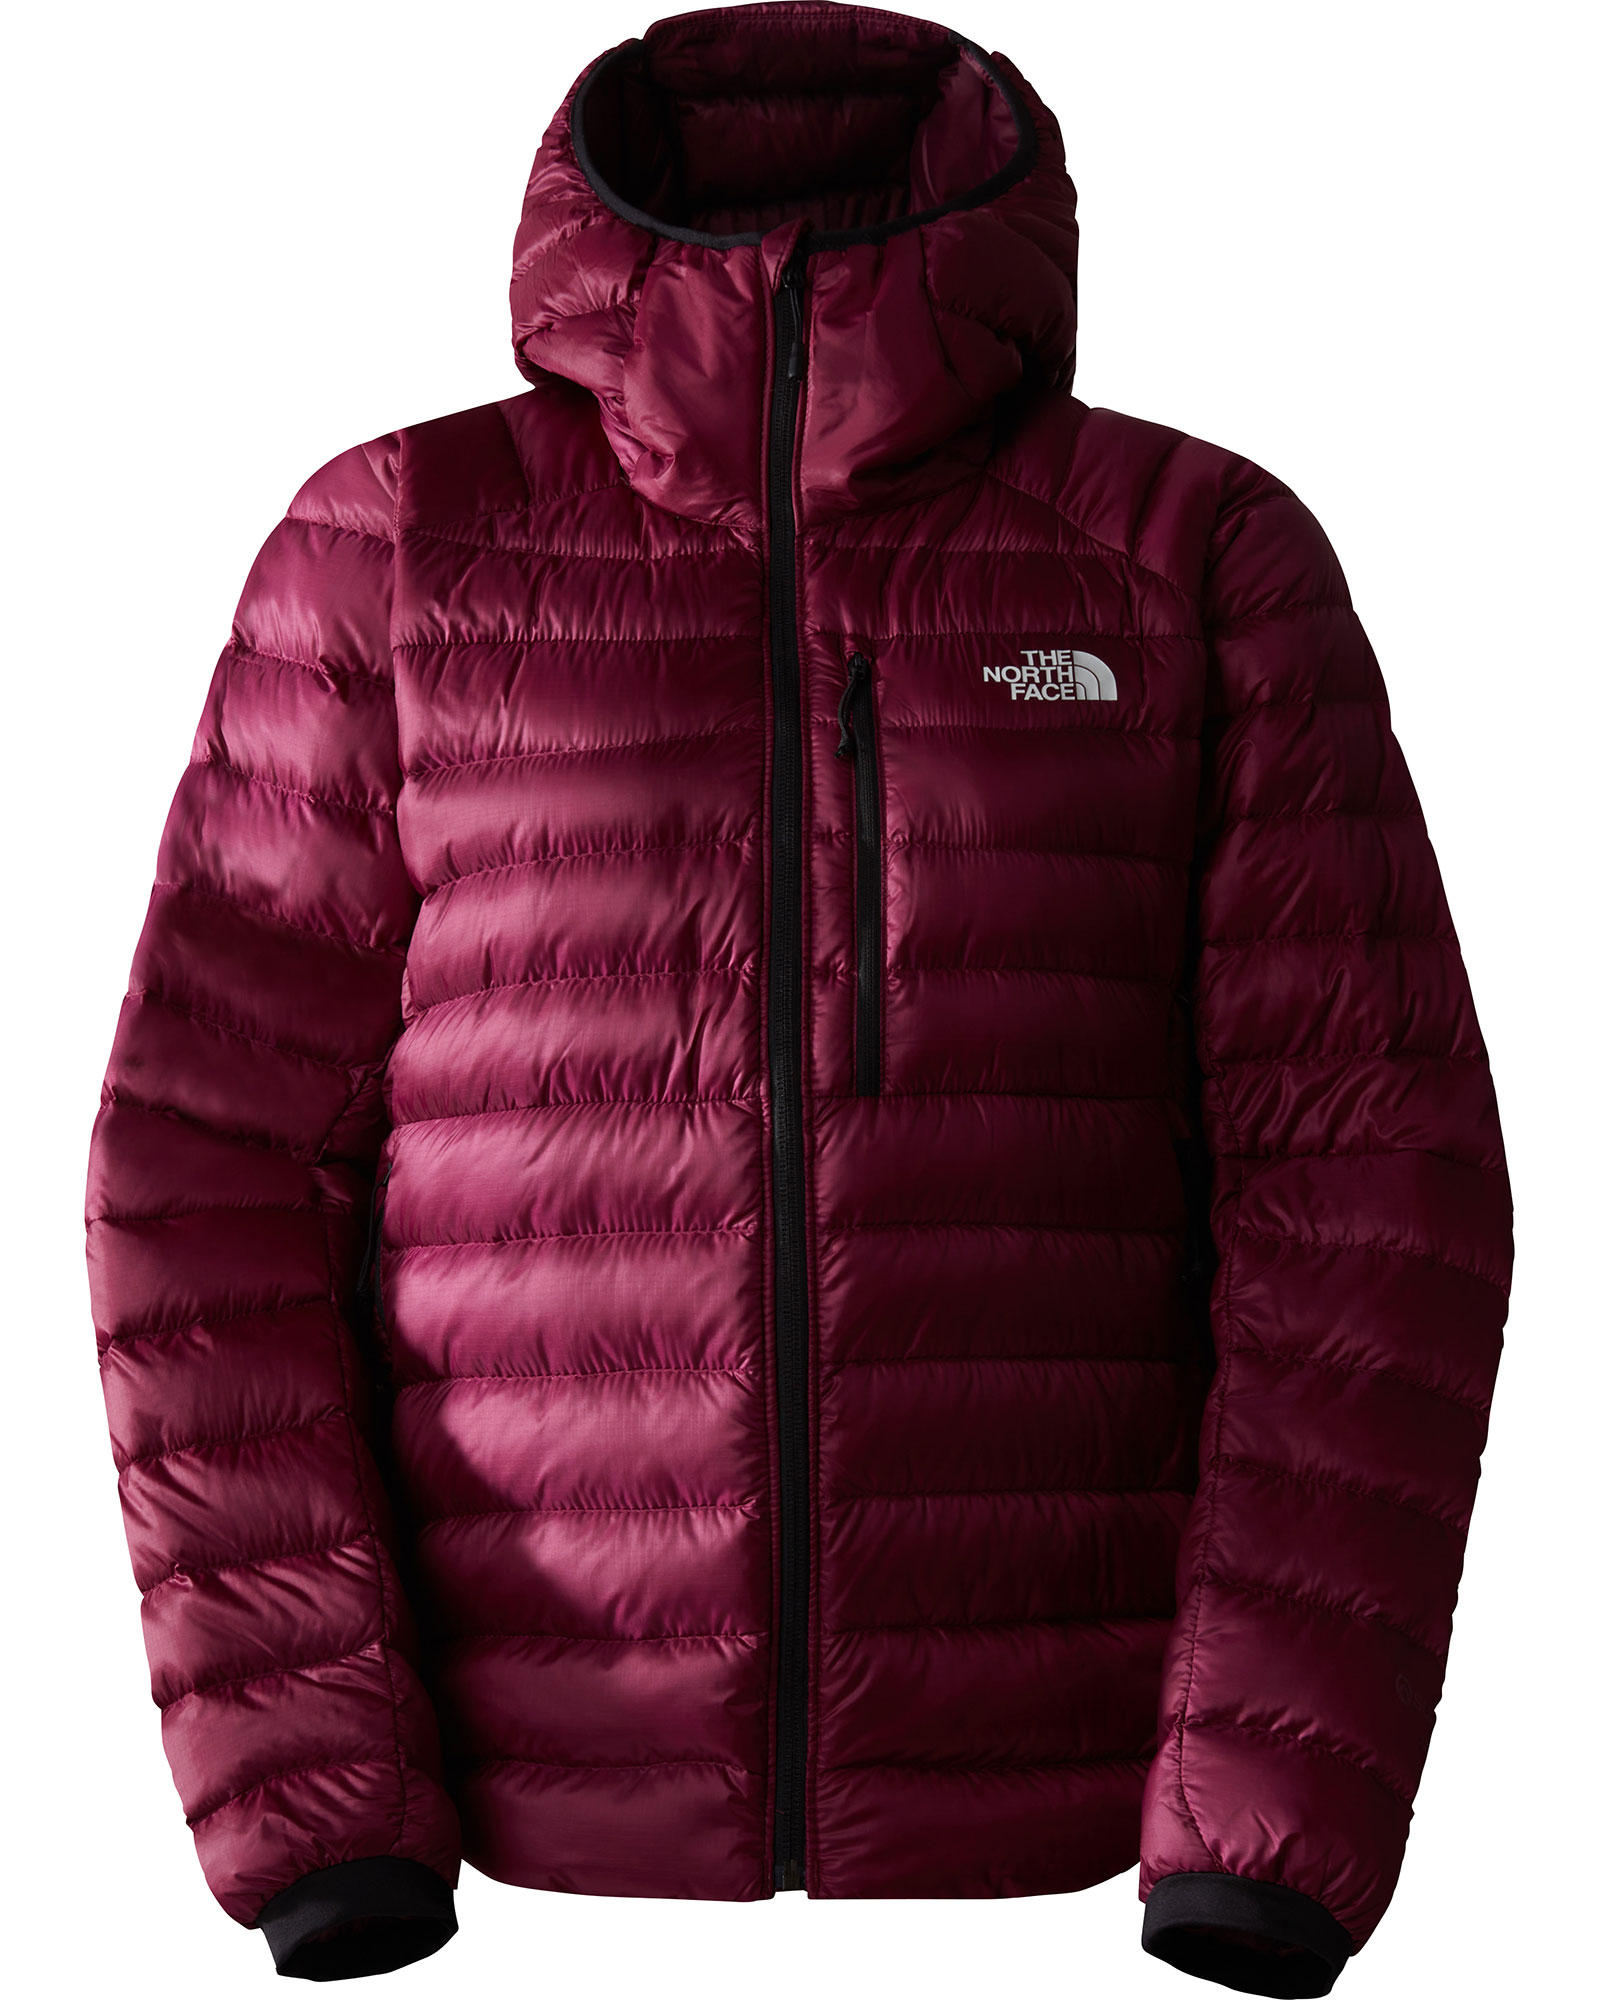 The North Face Summit Breithorn Women’s Down Hoodie - Boysenberry S